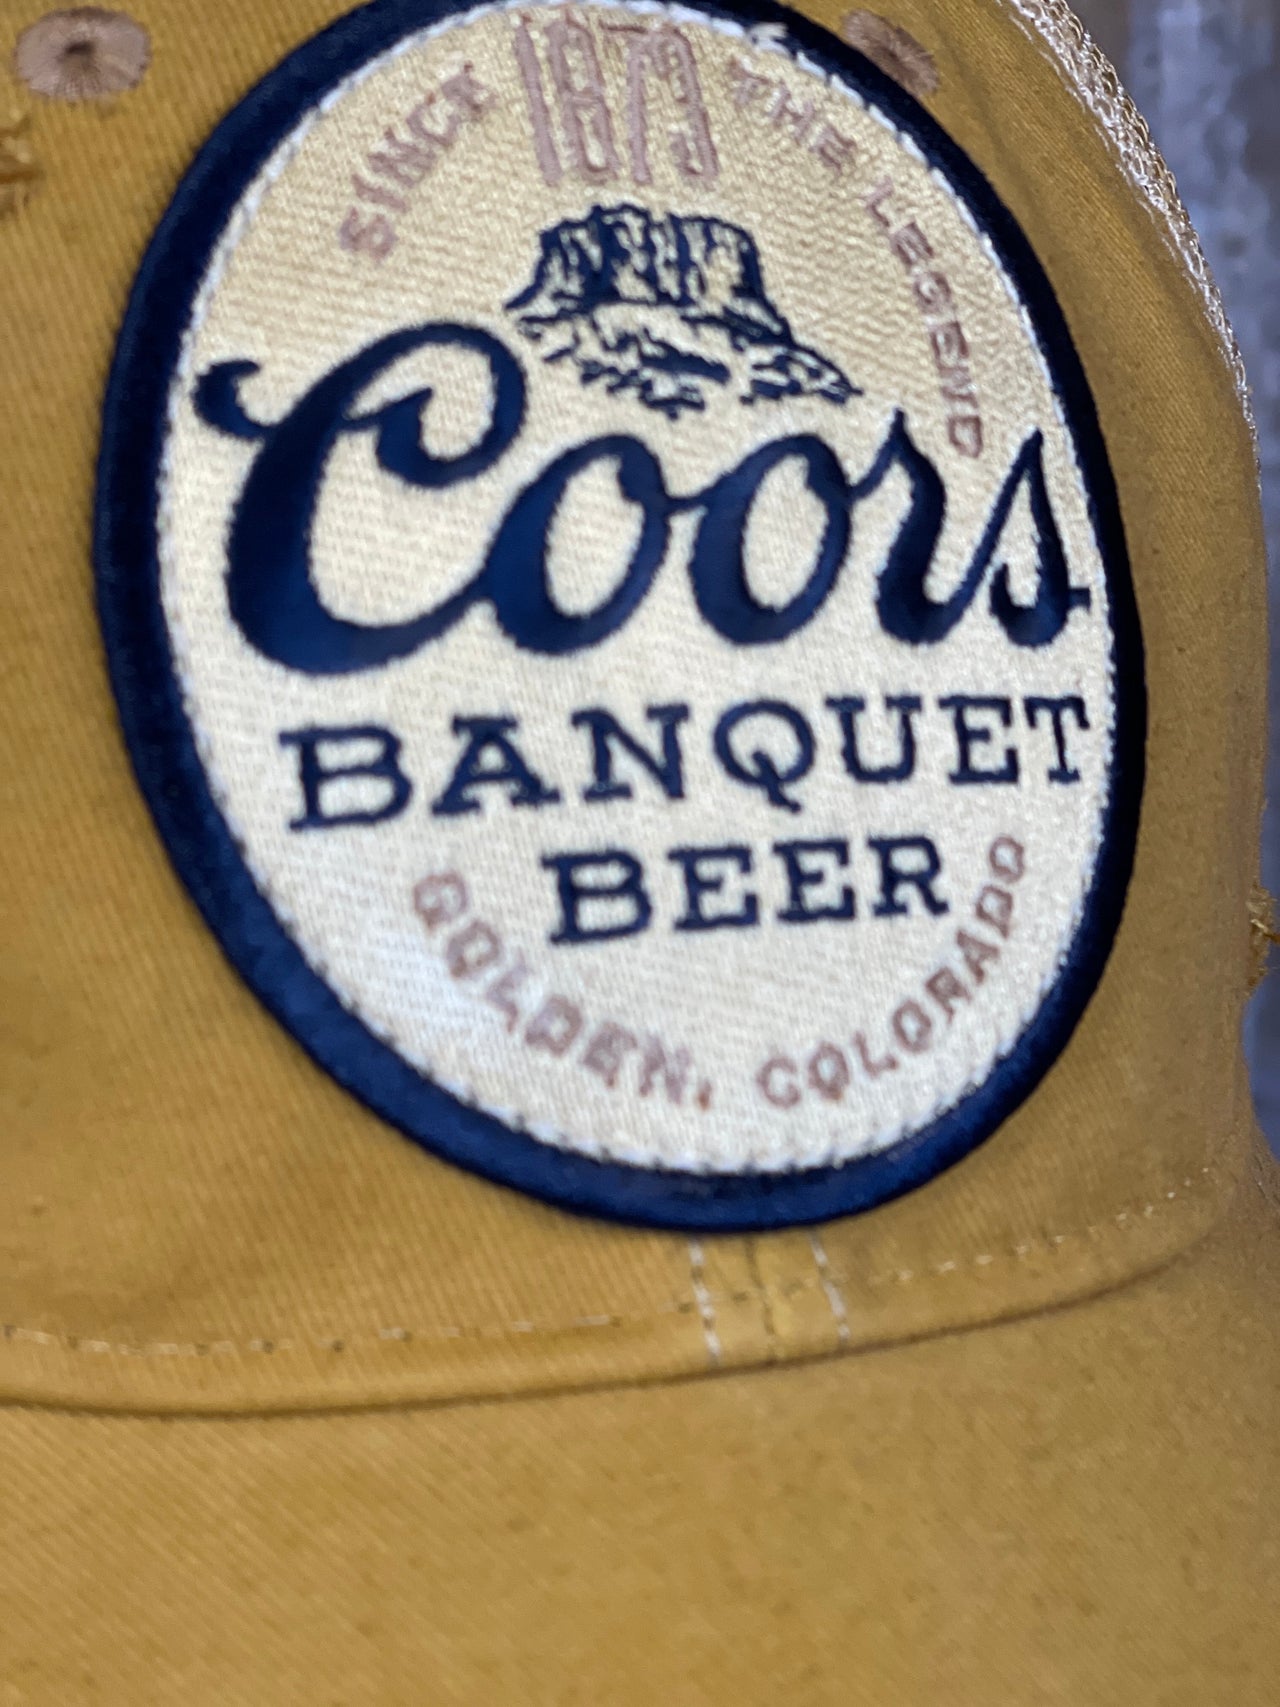 Coors Banquet OVAL 1873 Retro Hat Ginger